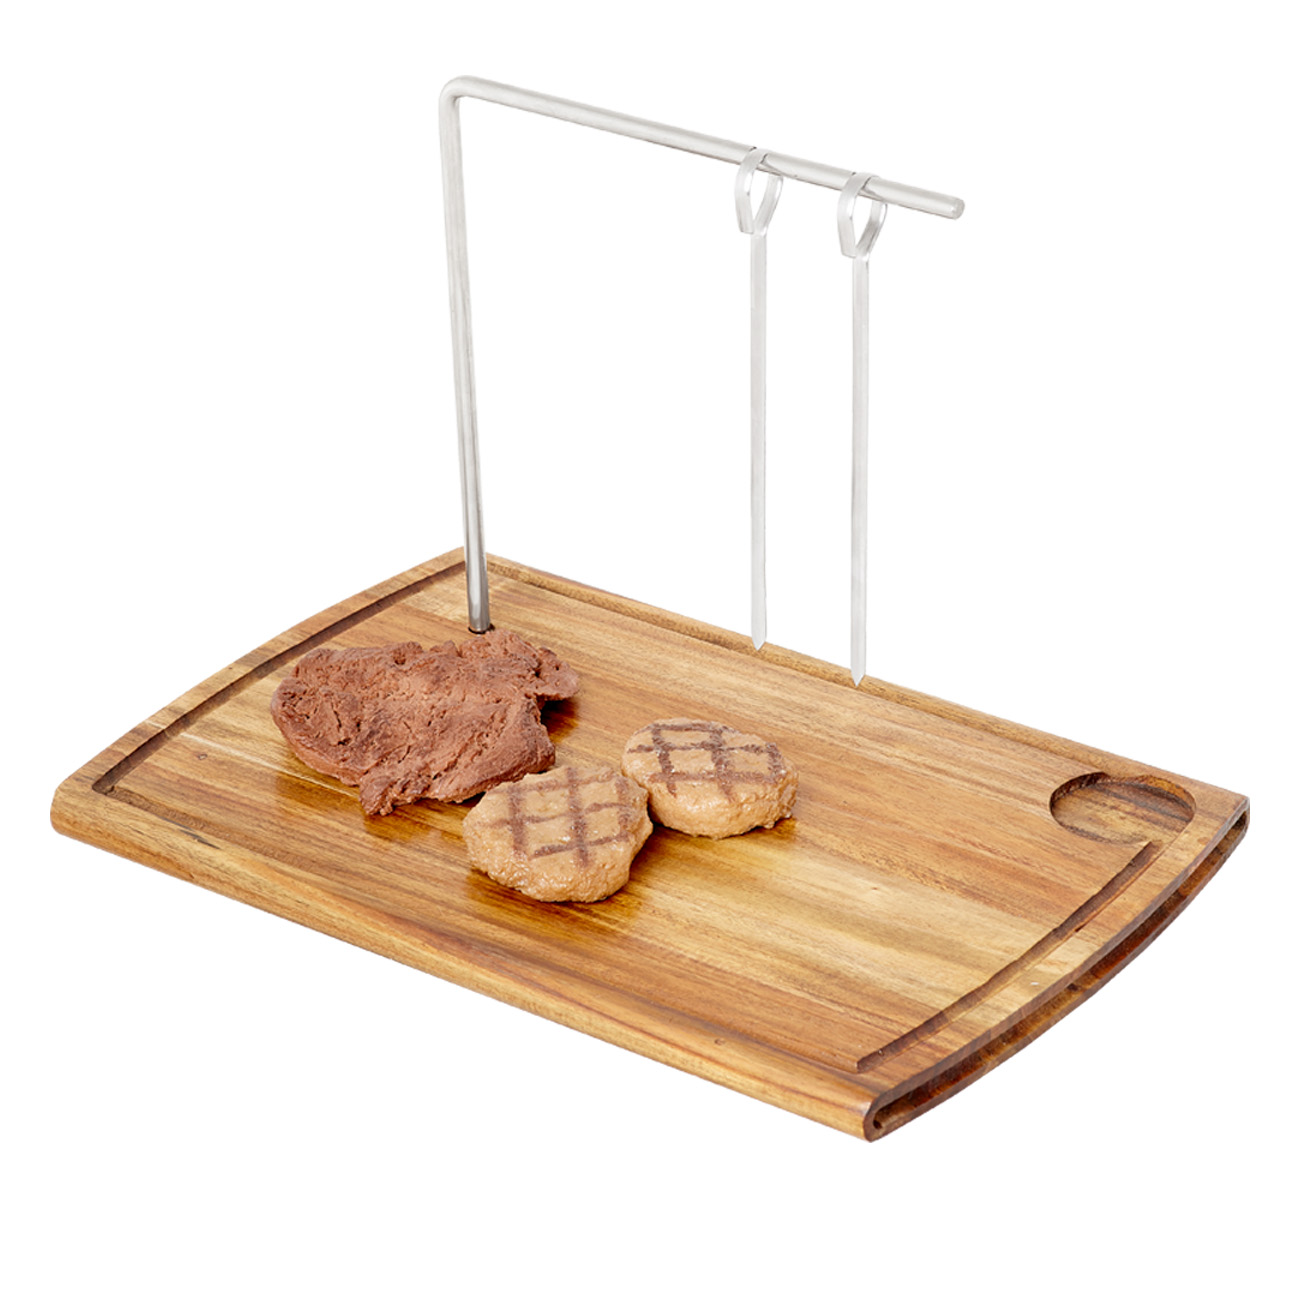 2 Skewers L Shape Espetada Stand With Oval Model Iroko Wood and 1 Sauce Cup Part Skewer Stand